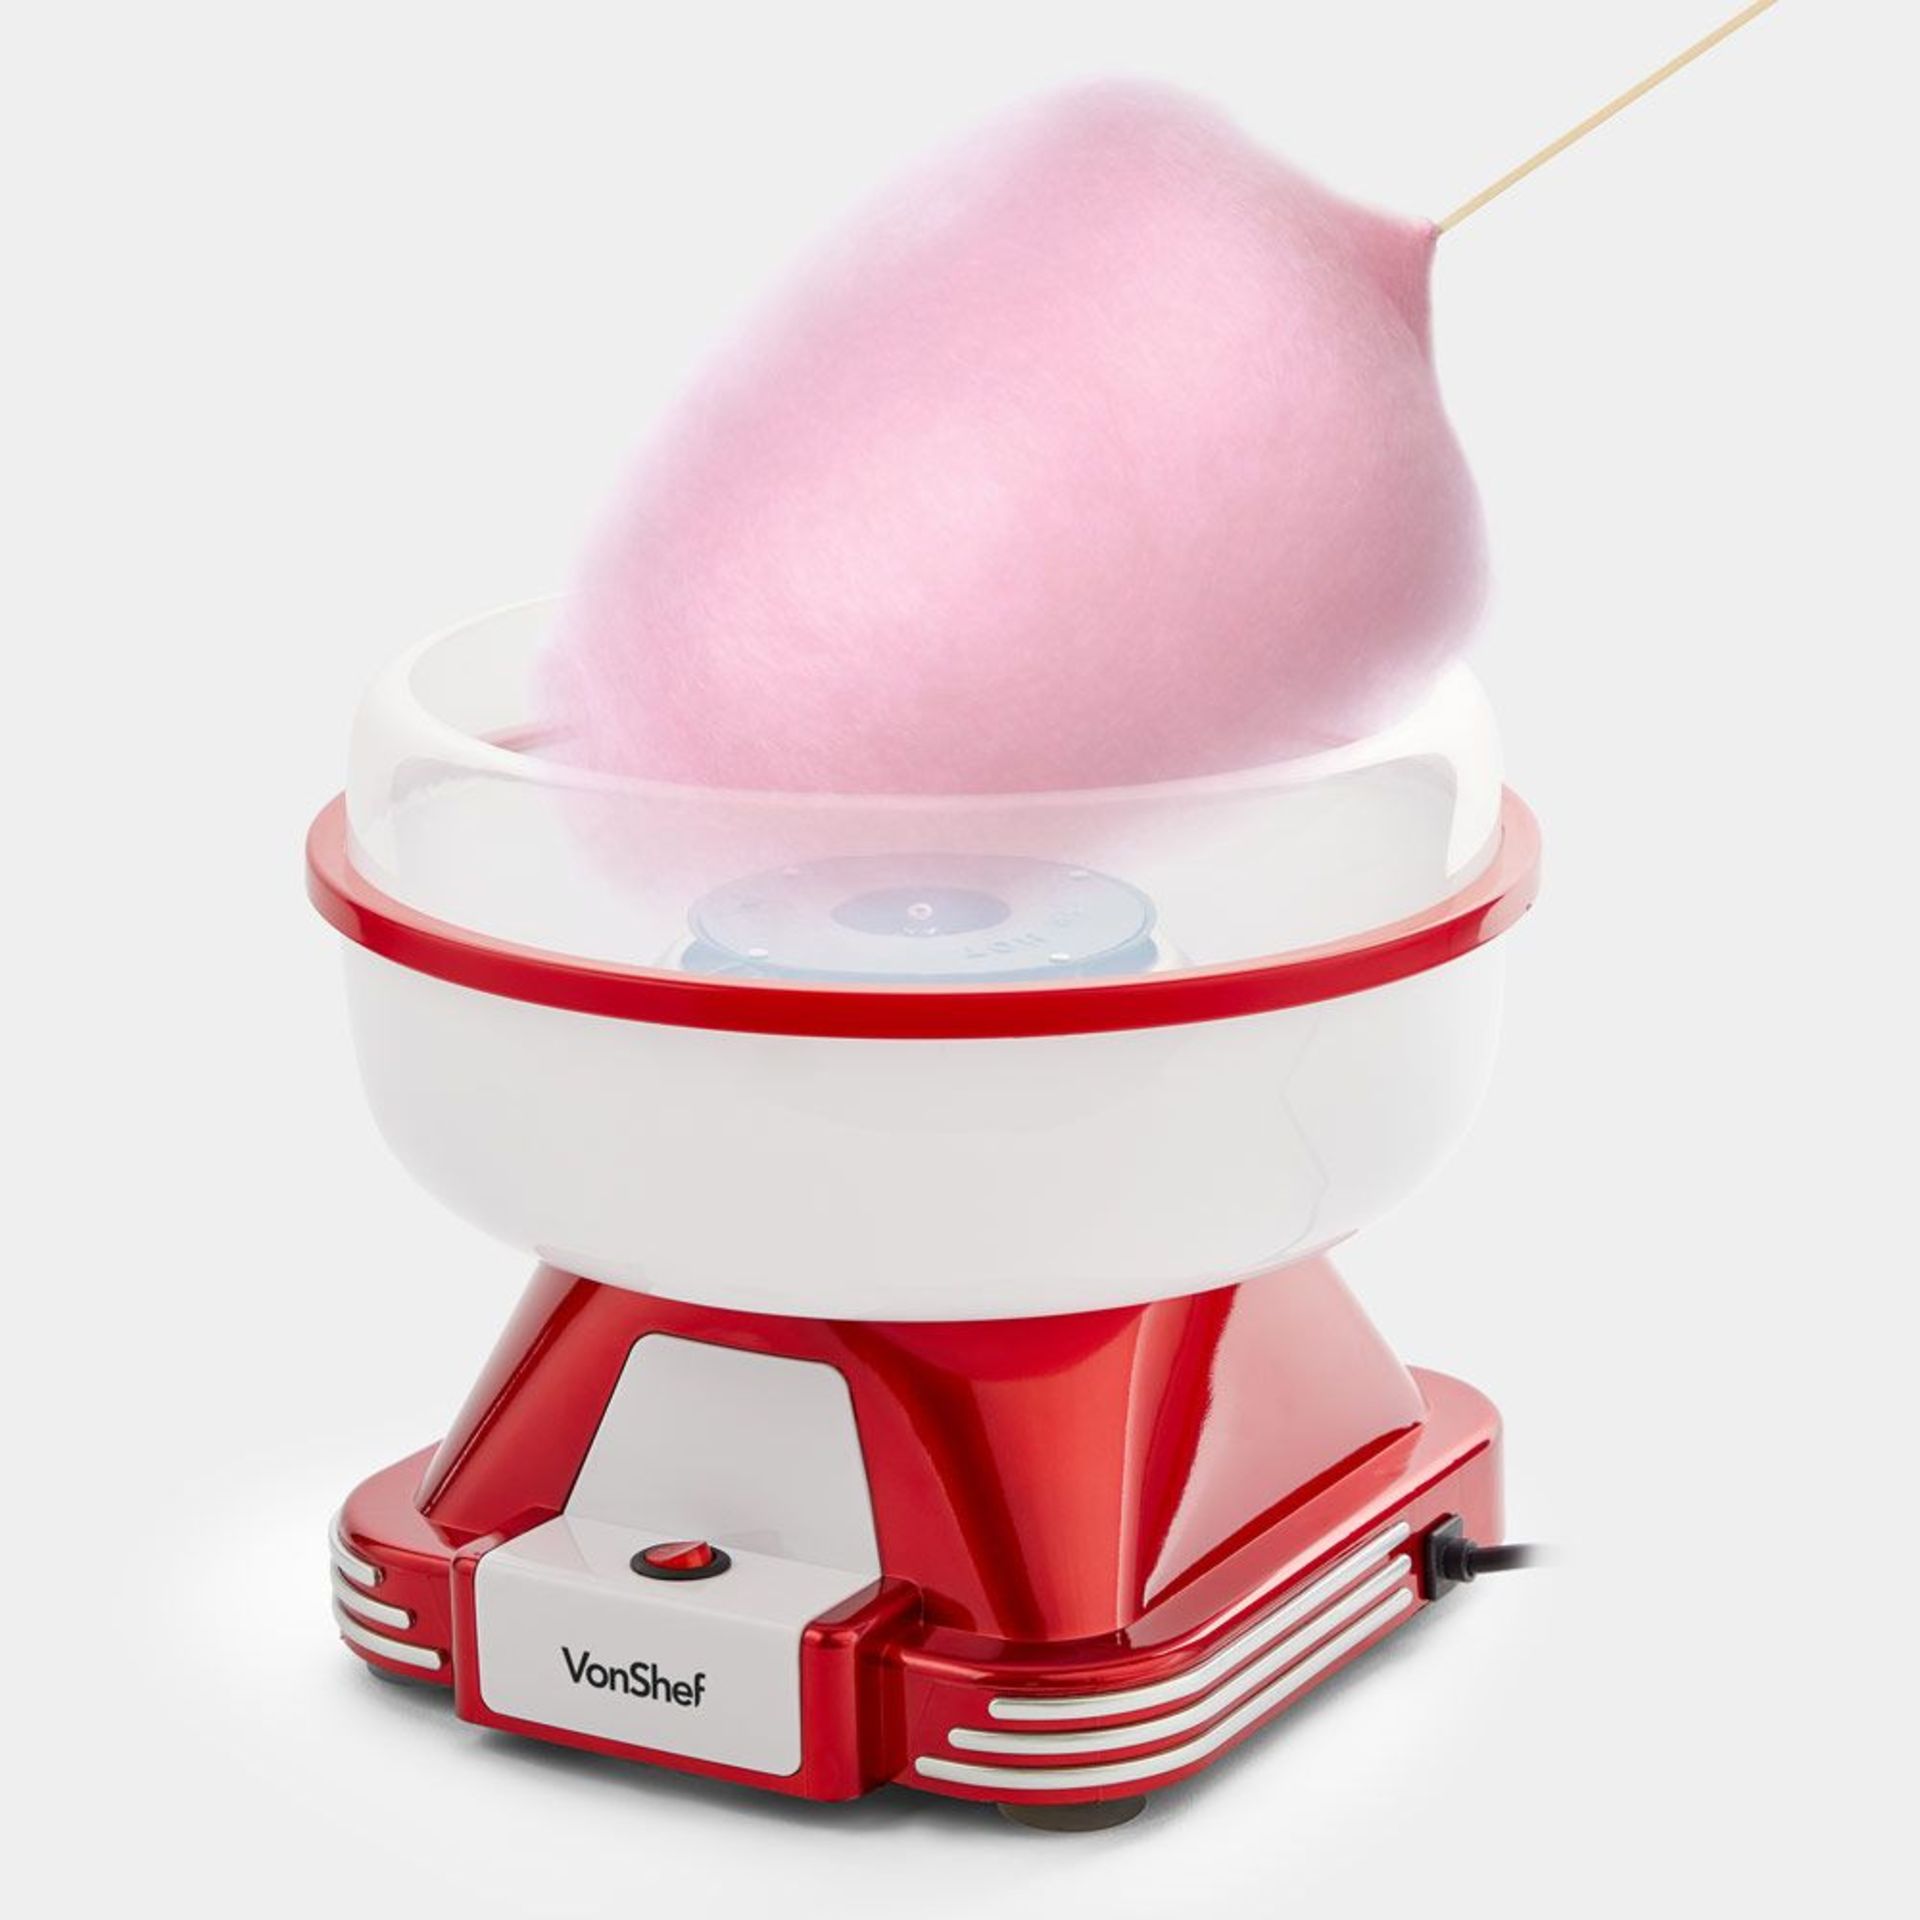 Retro Candy Floss Maker. Bring the taste of the funfair home with a retro candy floss machine. The